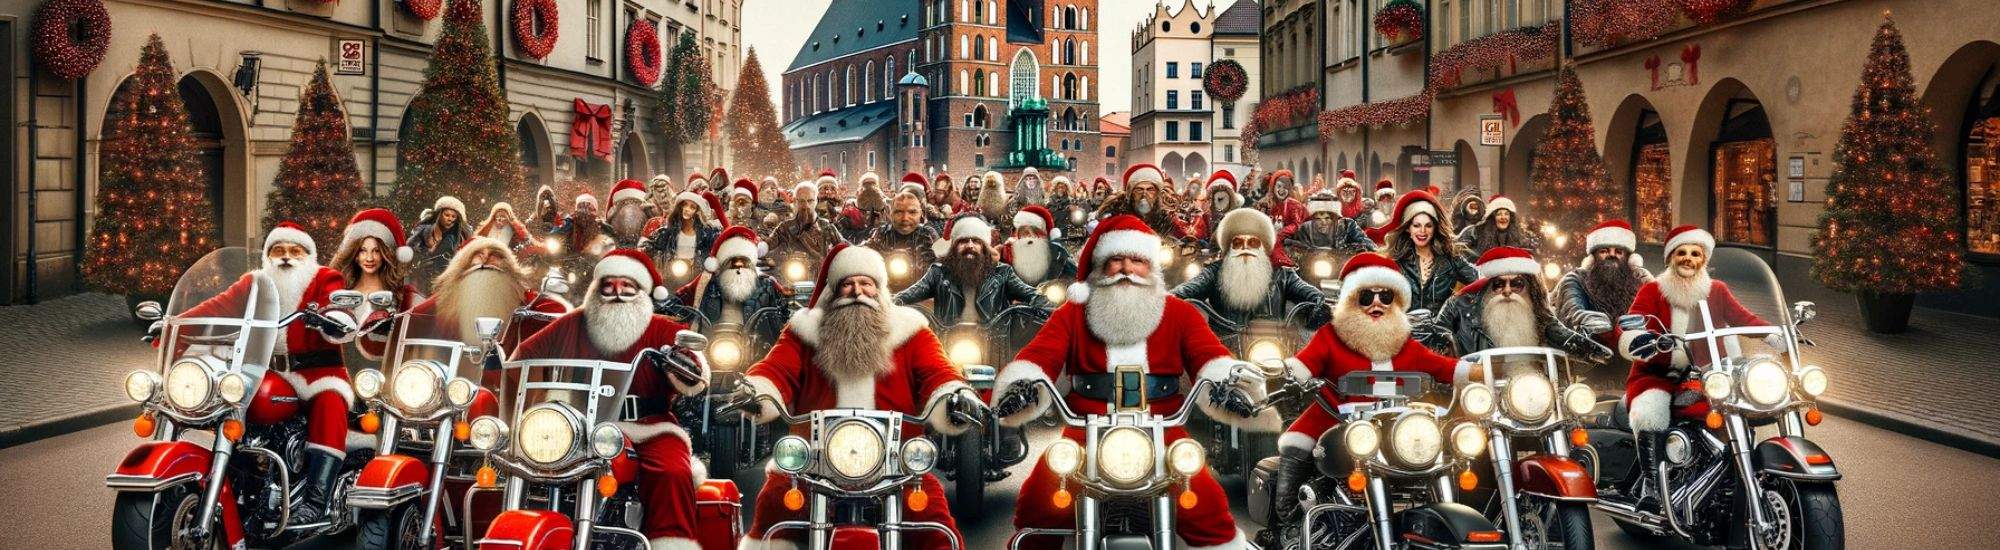 MotoSantas in Krakow: Joyful Tradition with a Noble Cause